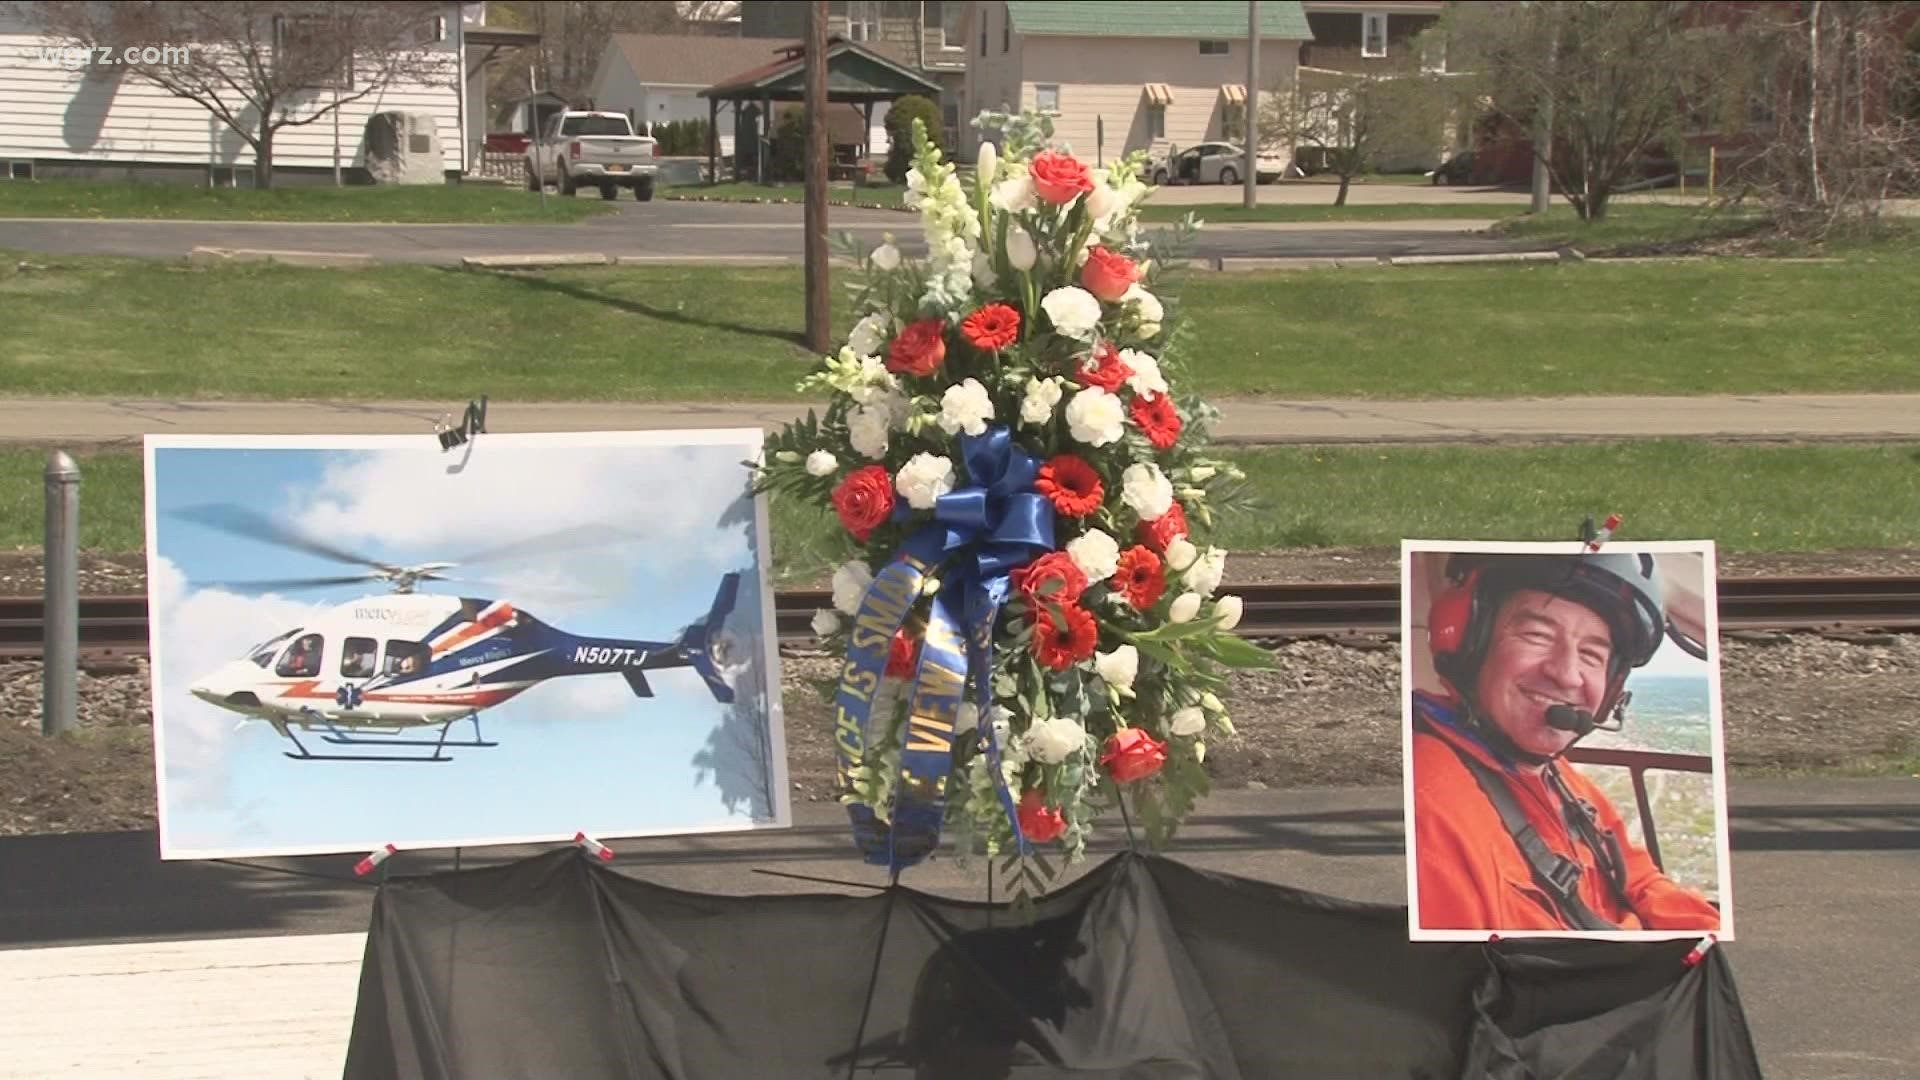 Saturday afternoon, first responders came together to pay tribute to the two men whose lives were lost too soon.